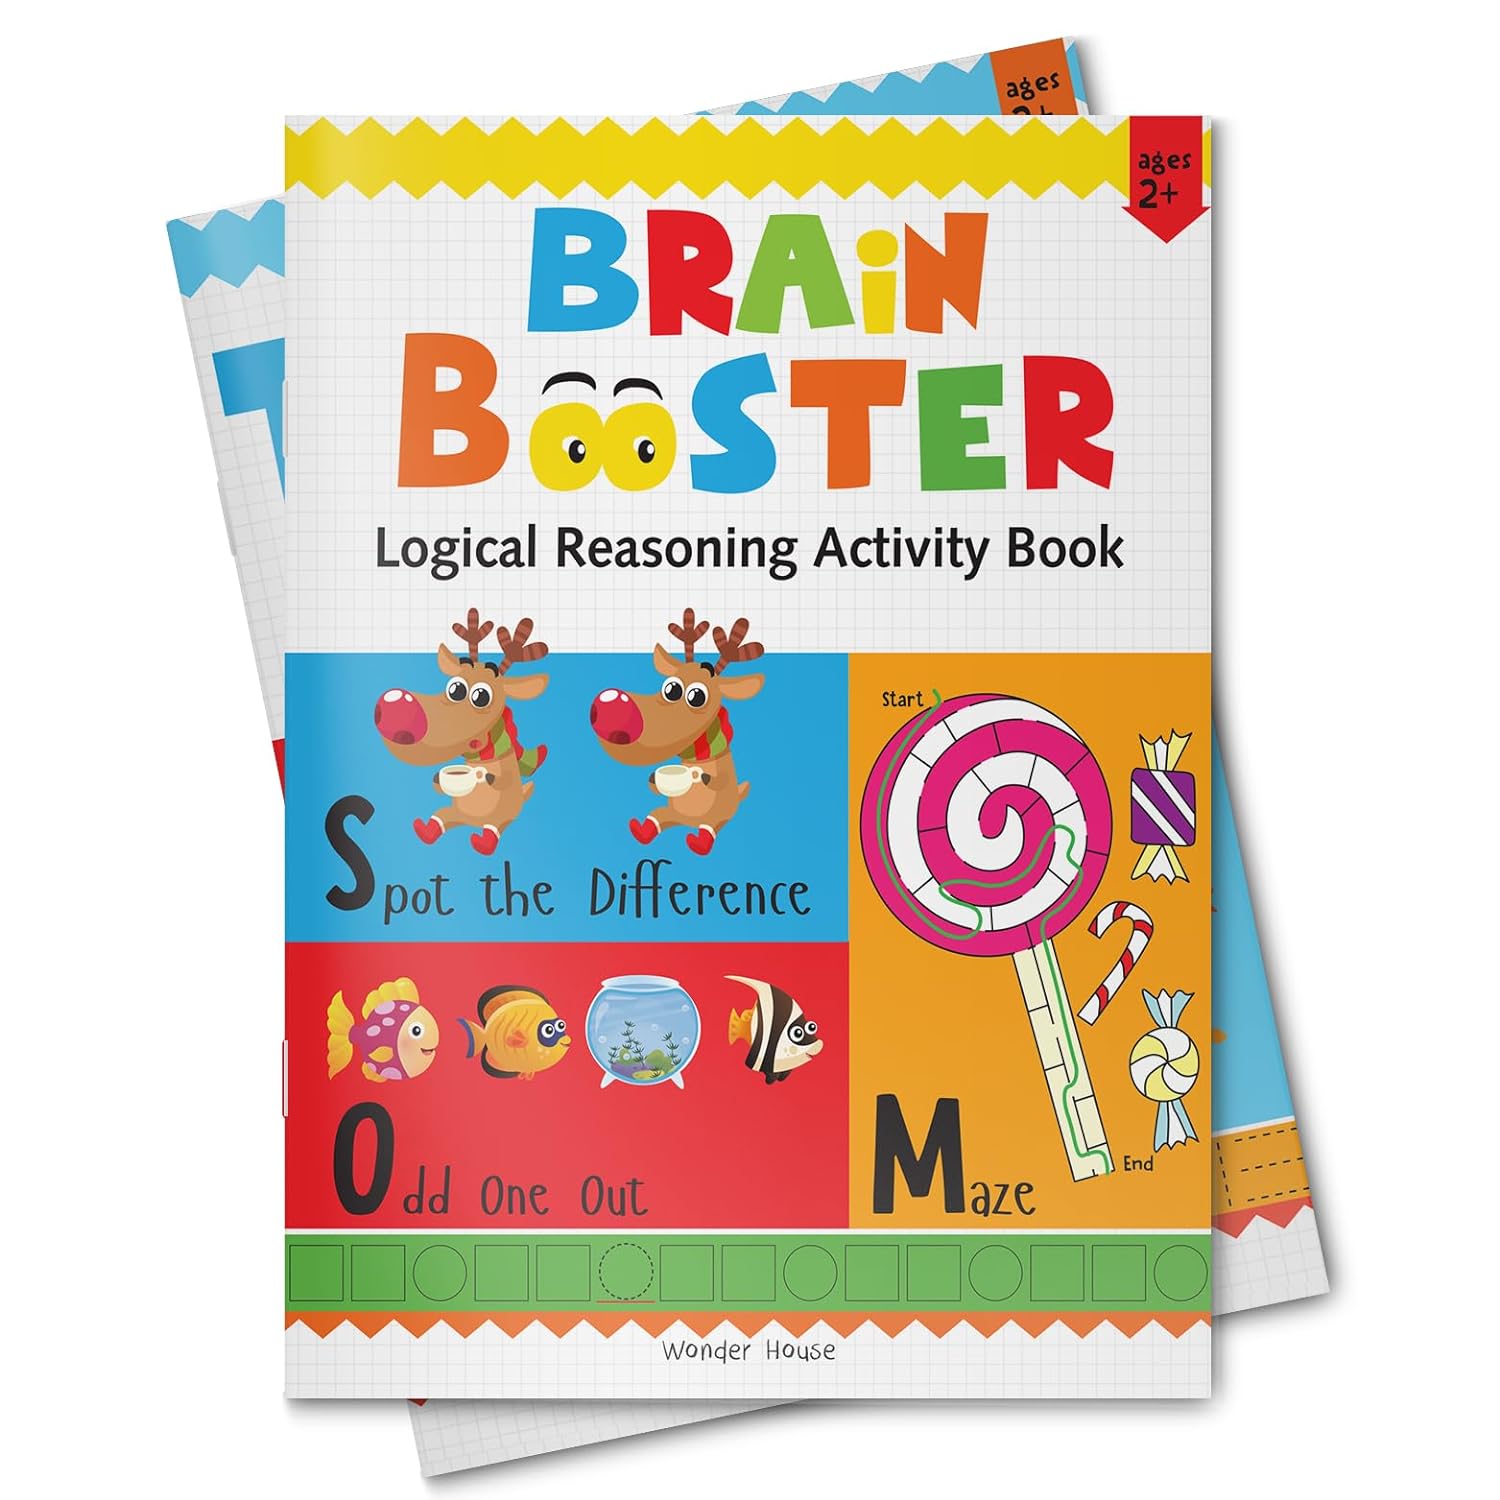 Brain Booster - Logical Reasoning Activity Book For Age 2+